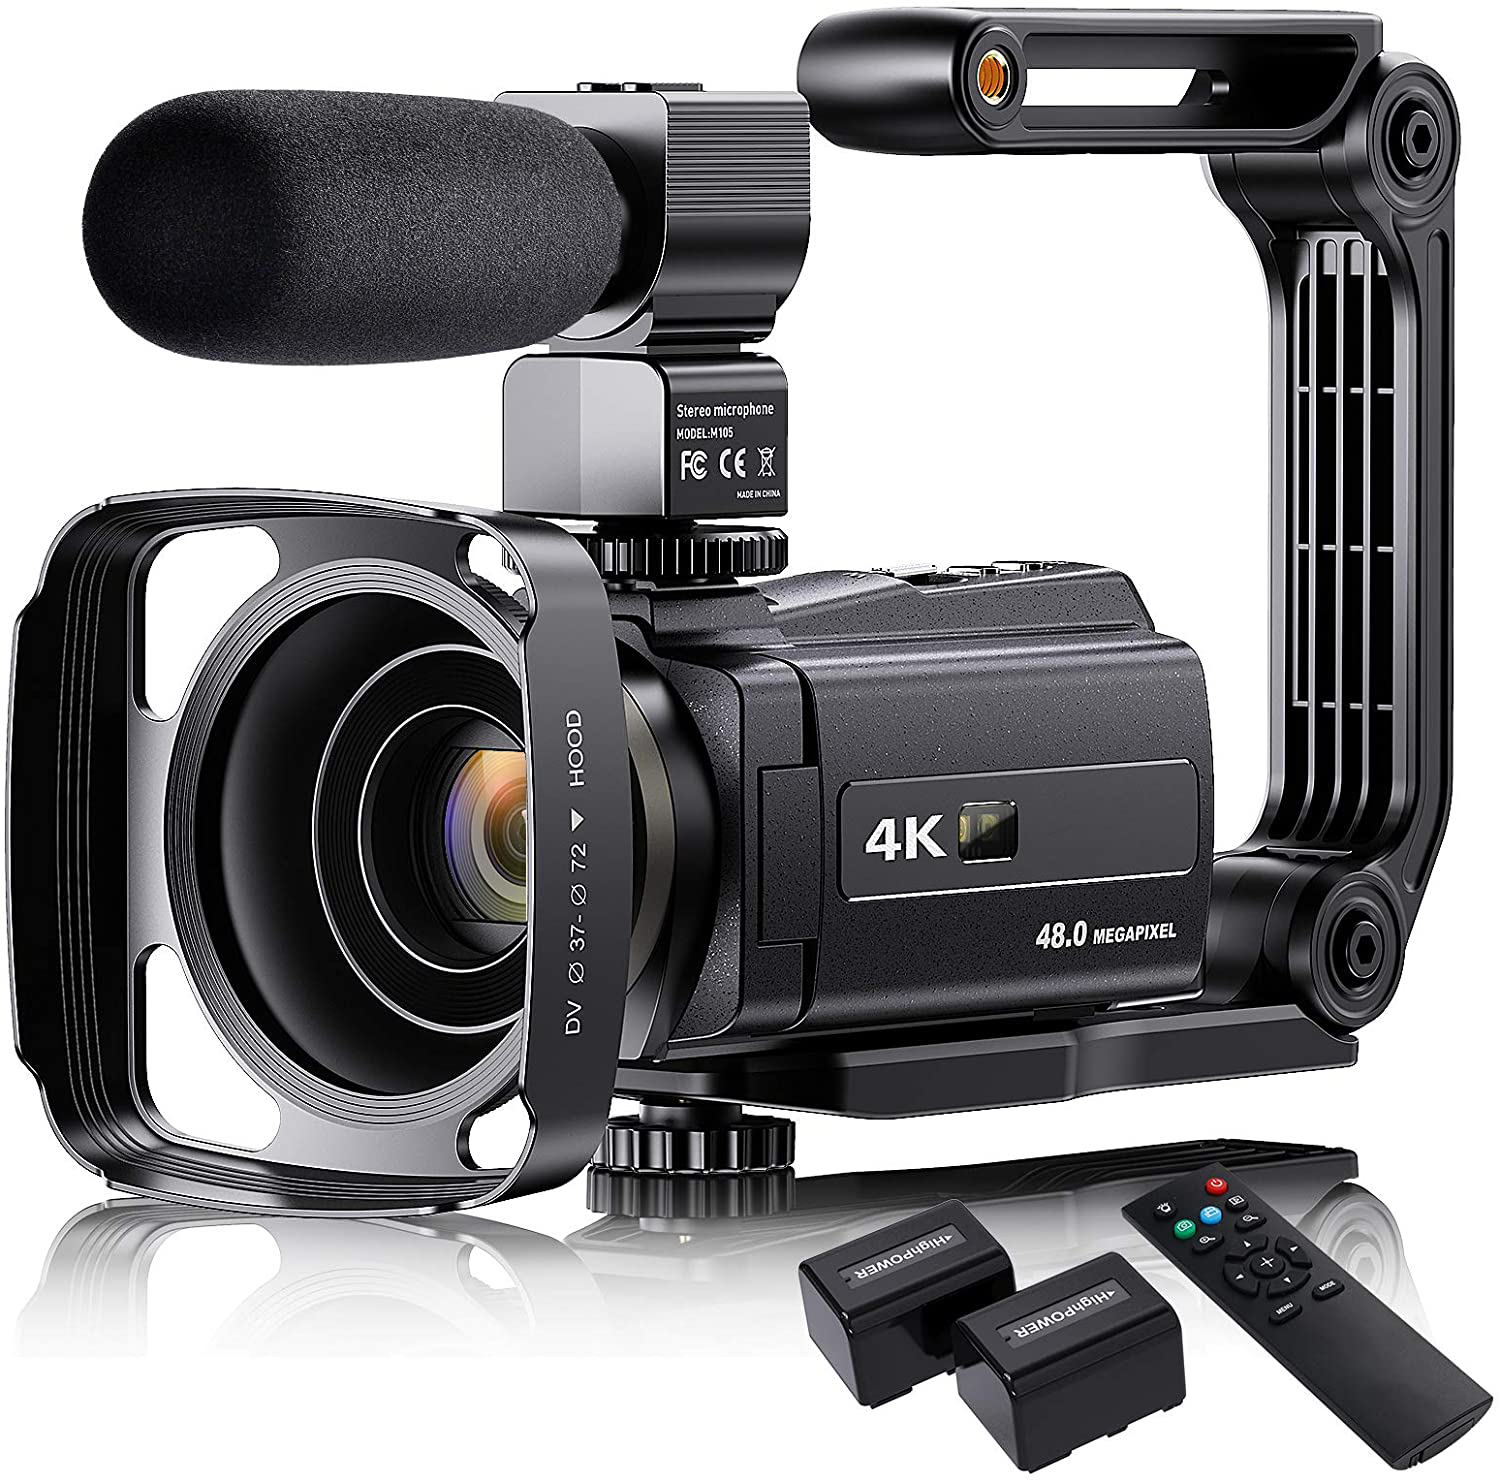 4K Video Camera Camcorder with Microphone, VAFOTON 48MP Vlogging Camera for YouTube 16X Zoom 3.0" Touch Screen IR Night Vision Wi-Fi Vlog Cameras Webcam with Handheld Stabilizer Remote Control